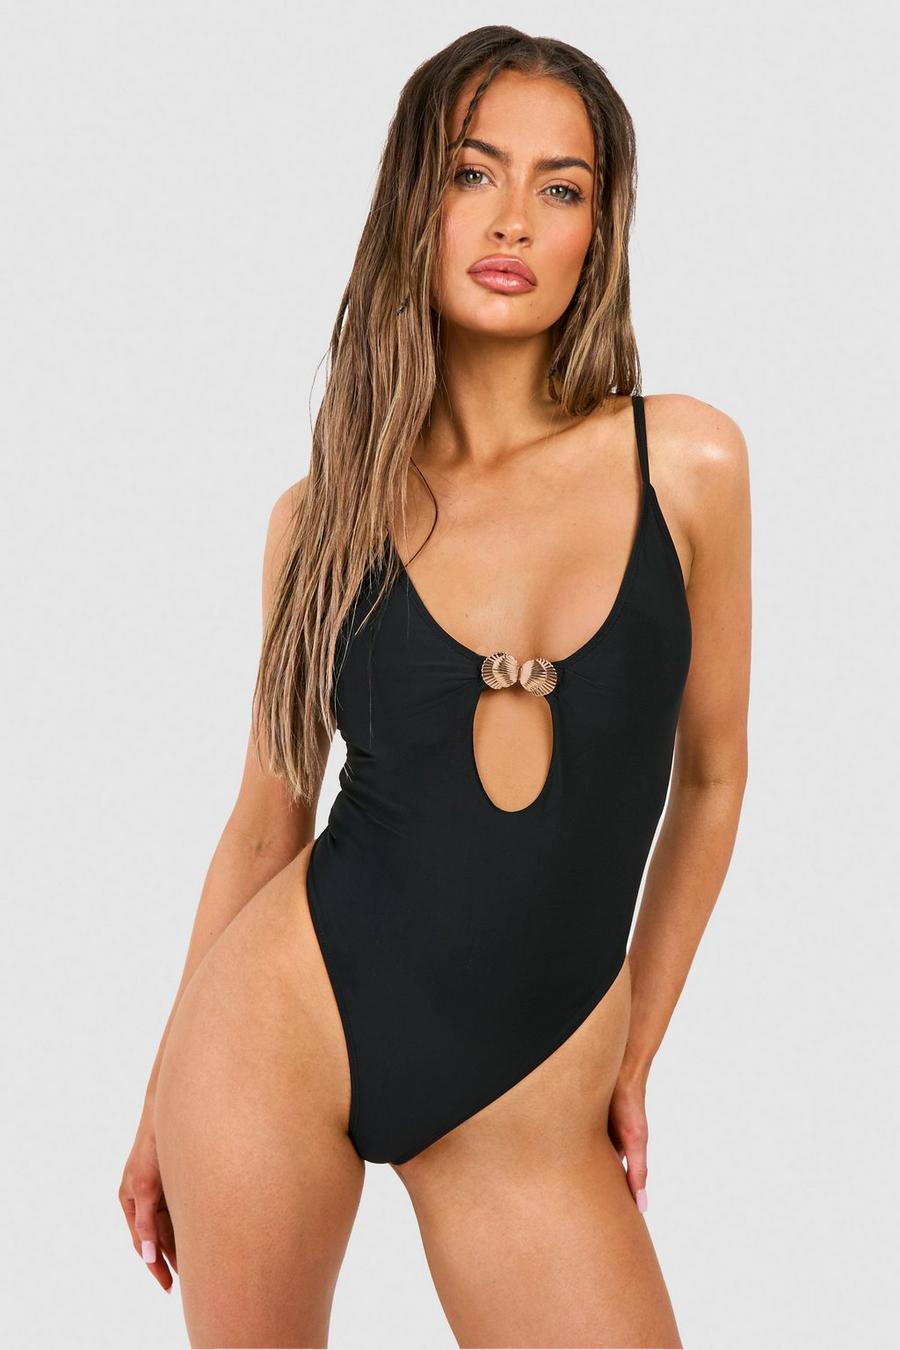 Cut Out One Piece Swimsuits, One Piece Cut Out Swimsuits